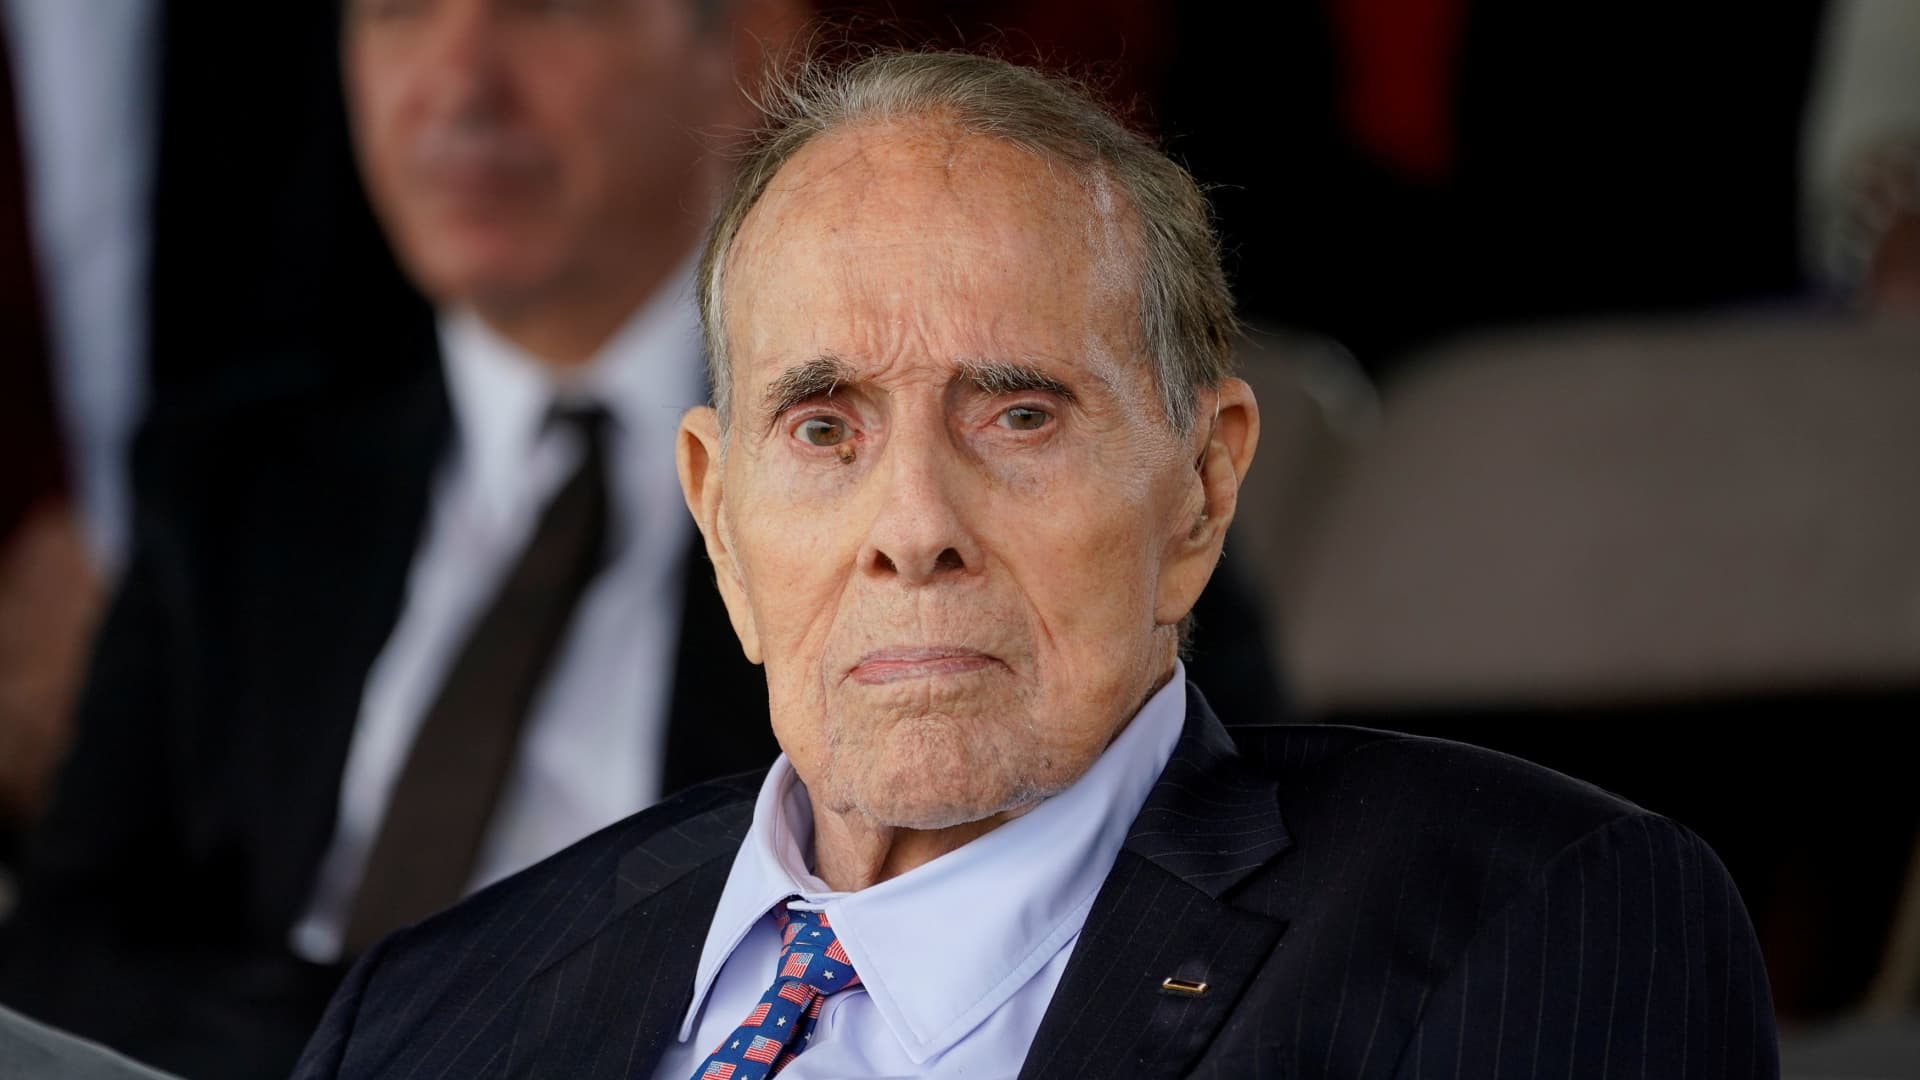 Former Senate majority leader Bob Dole (R-KS) attends a welcome ceremony in honor of new Joint Chiefs of Staff Chairman Army General Mark Milley at Joint Base Myer-Henderson Hall, Virginia, U.S., September 30, 2019.